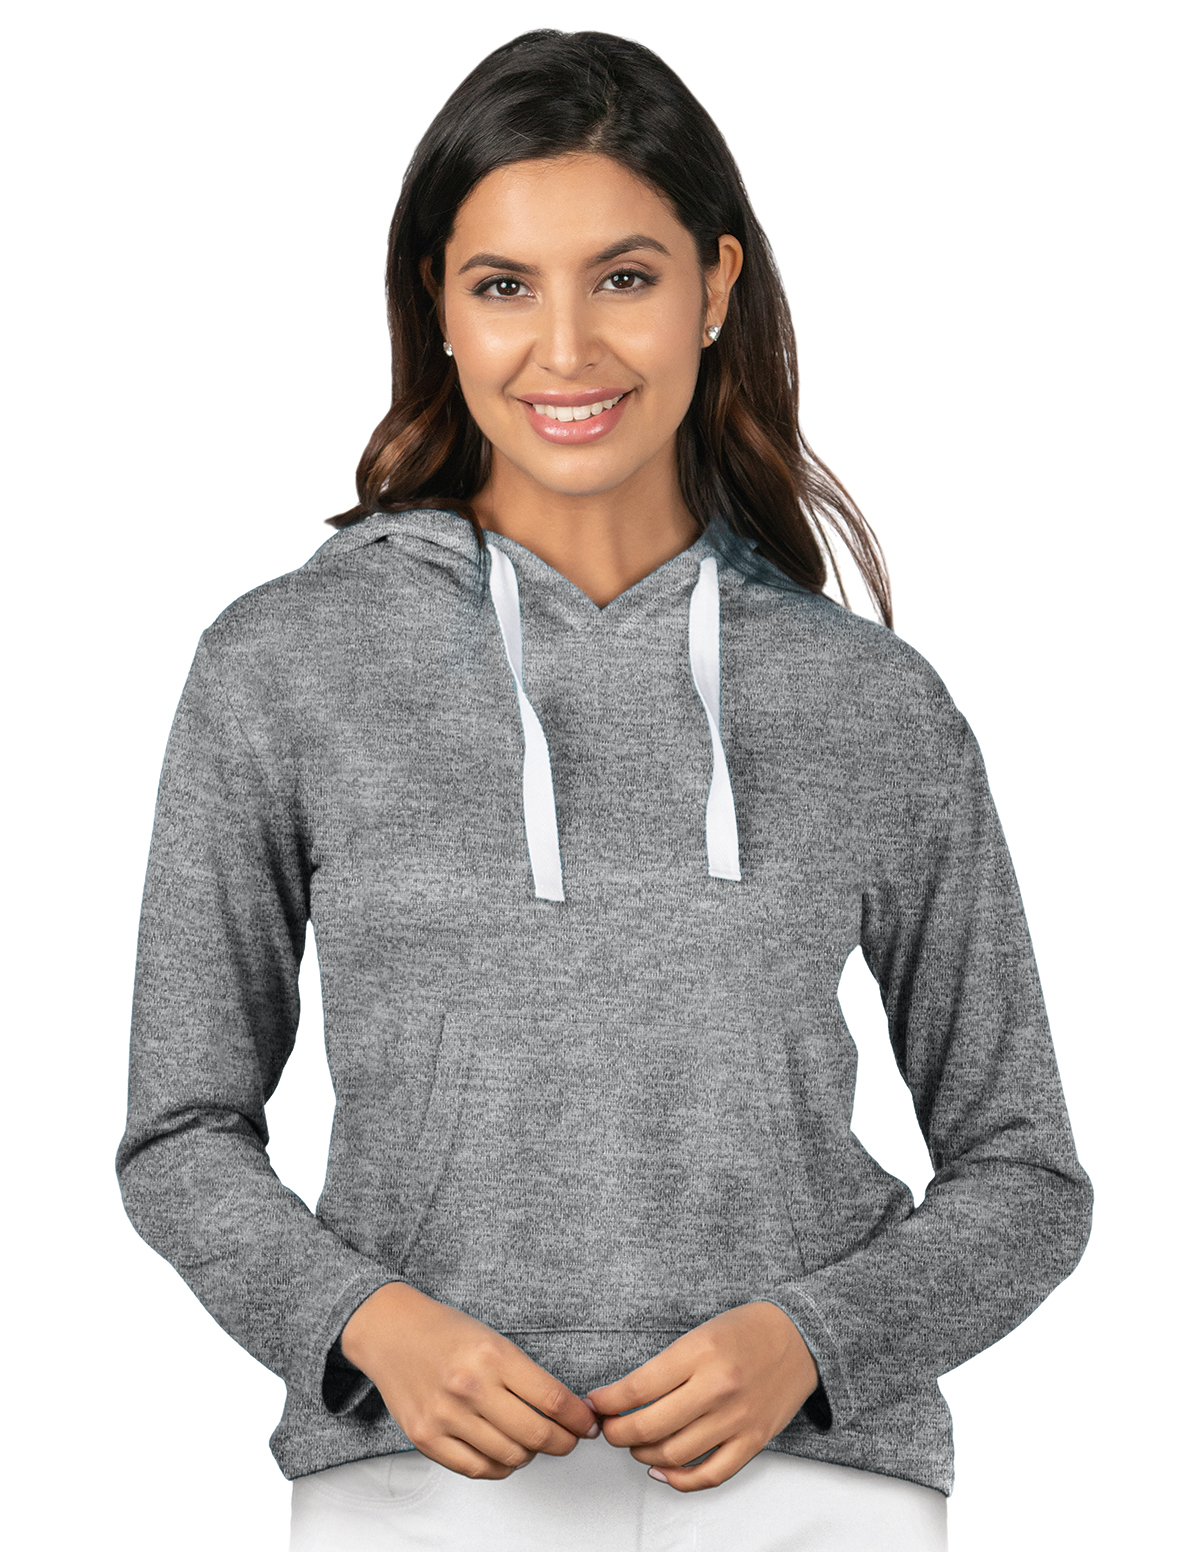 Tri-Mountain LB651 - Cassidy Women's Pullover Heather Knit Hoody $25.68